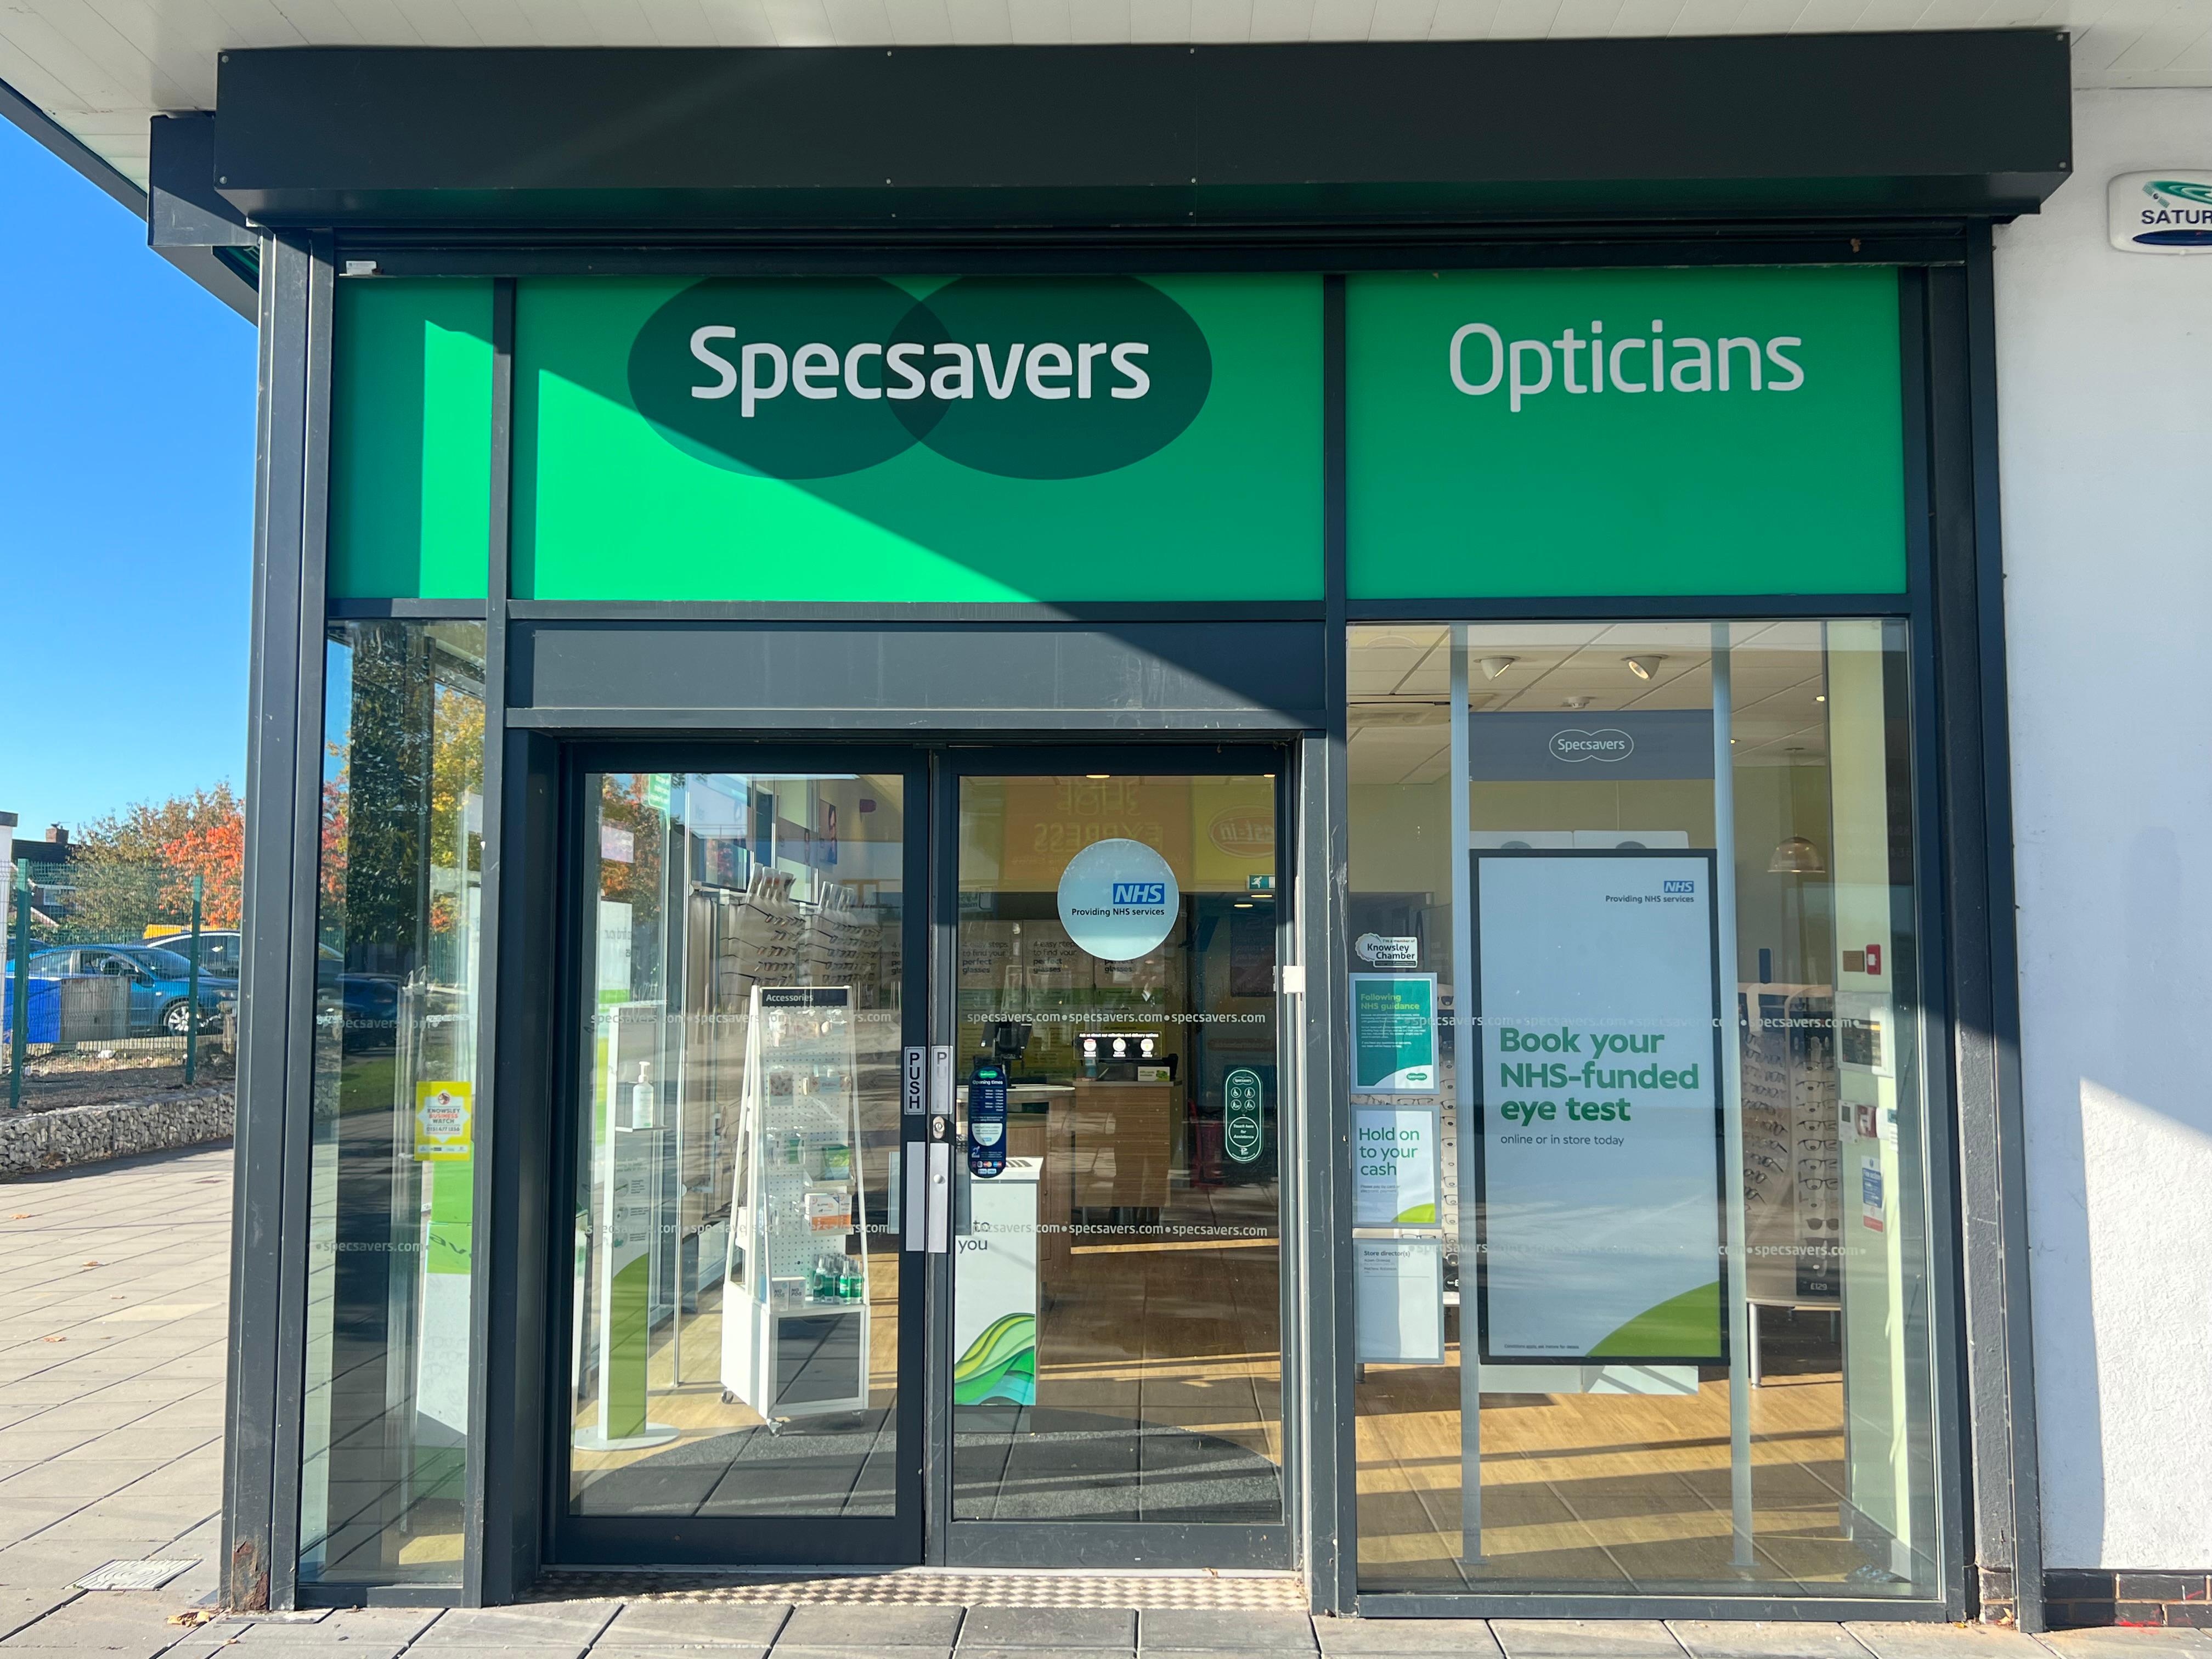 Halewood Specsavers Specsavers Opticians and Audiologists - Halewood Liverpool 01514 864902